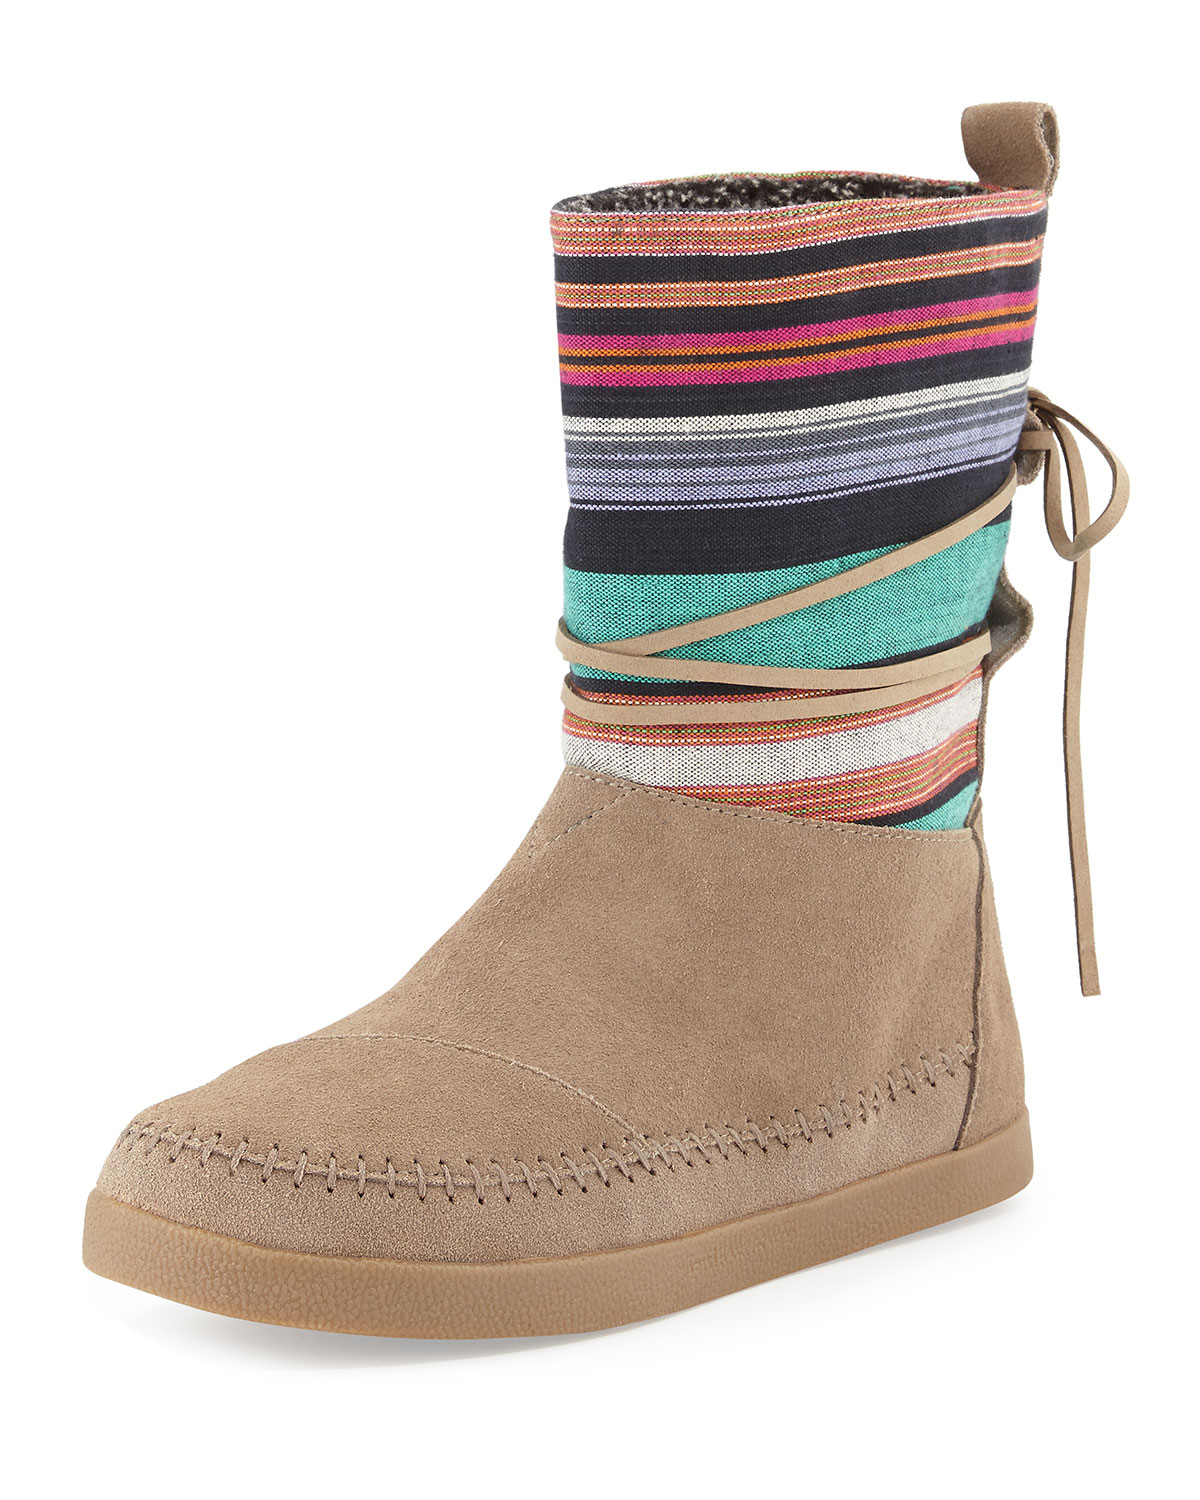 Shoeniverse: THE PRACTICAL AND ETHICAL EDIT - featuring Toms Guatemalan  Stripe Nepal Boots in Navy and Taupe